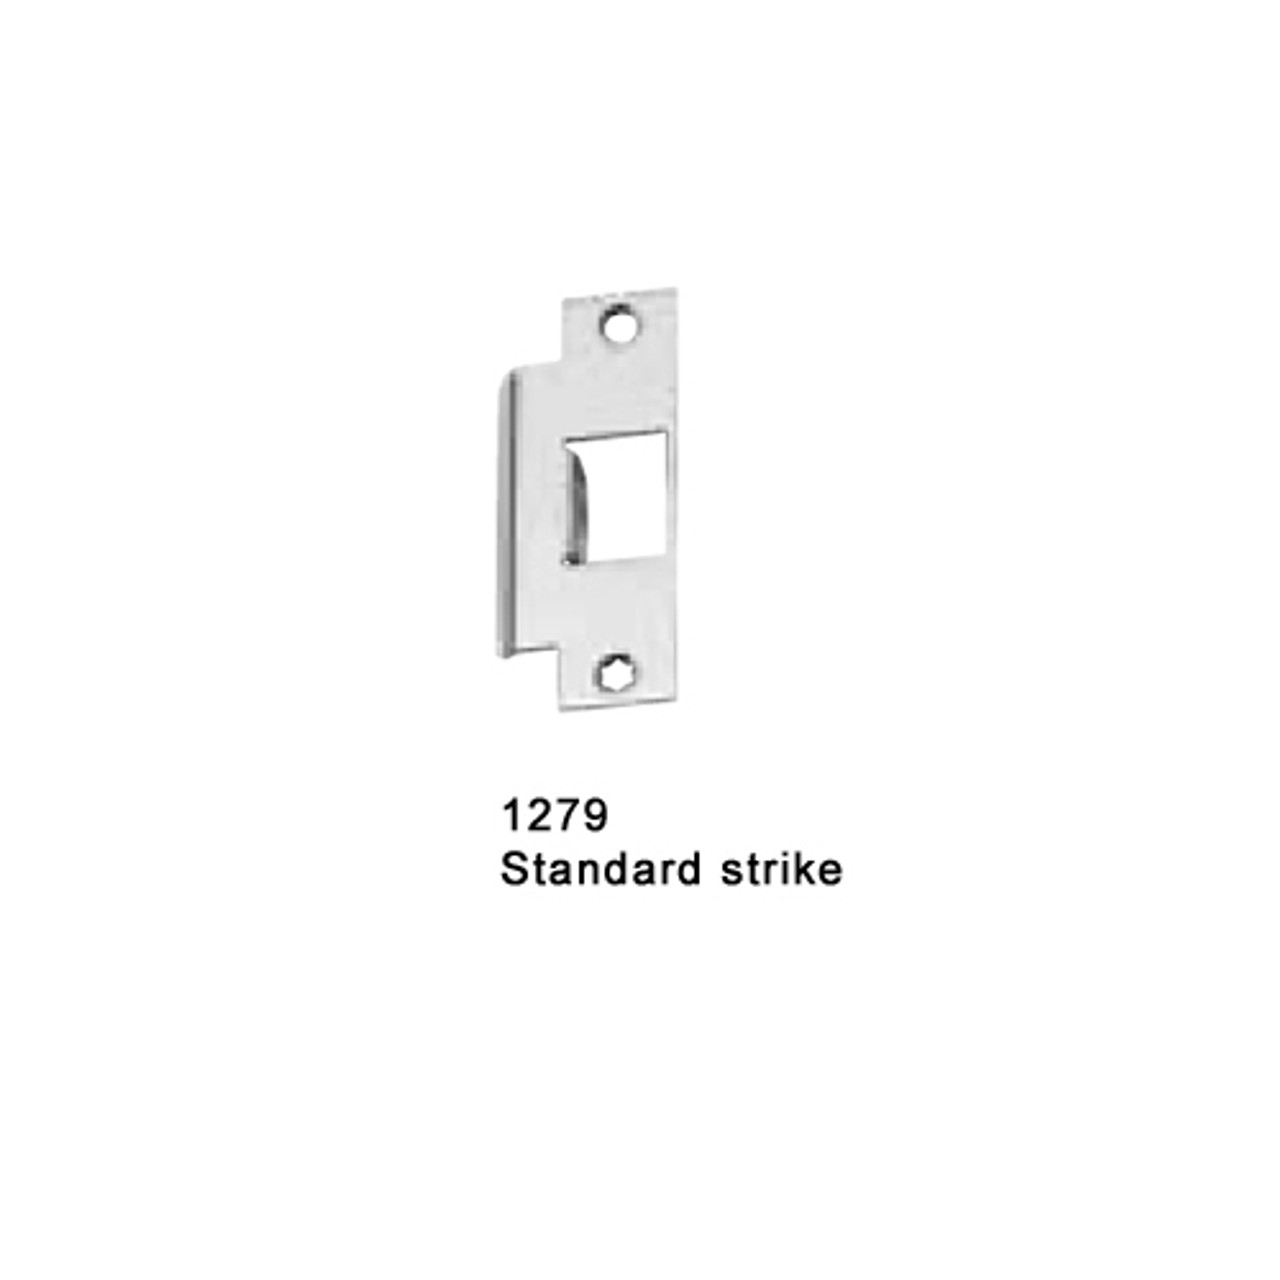 F-25-M-L-Dane-US32-4-LHR Falcon 25 Series Fire Rated Mortise Lock Devices with 510L Dane Lever Trim in Polished Stainless Steel